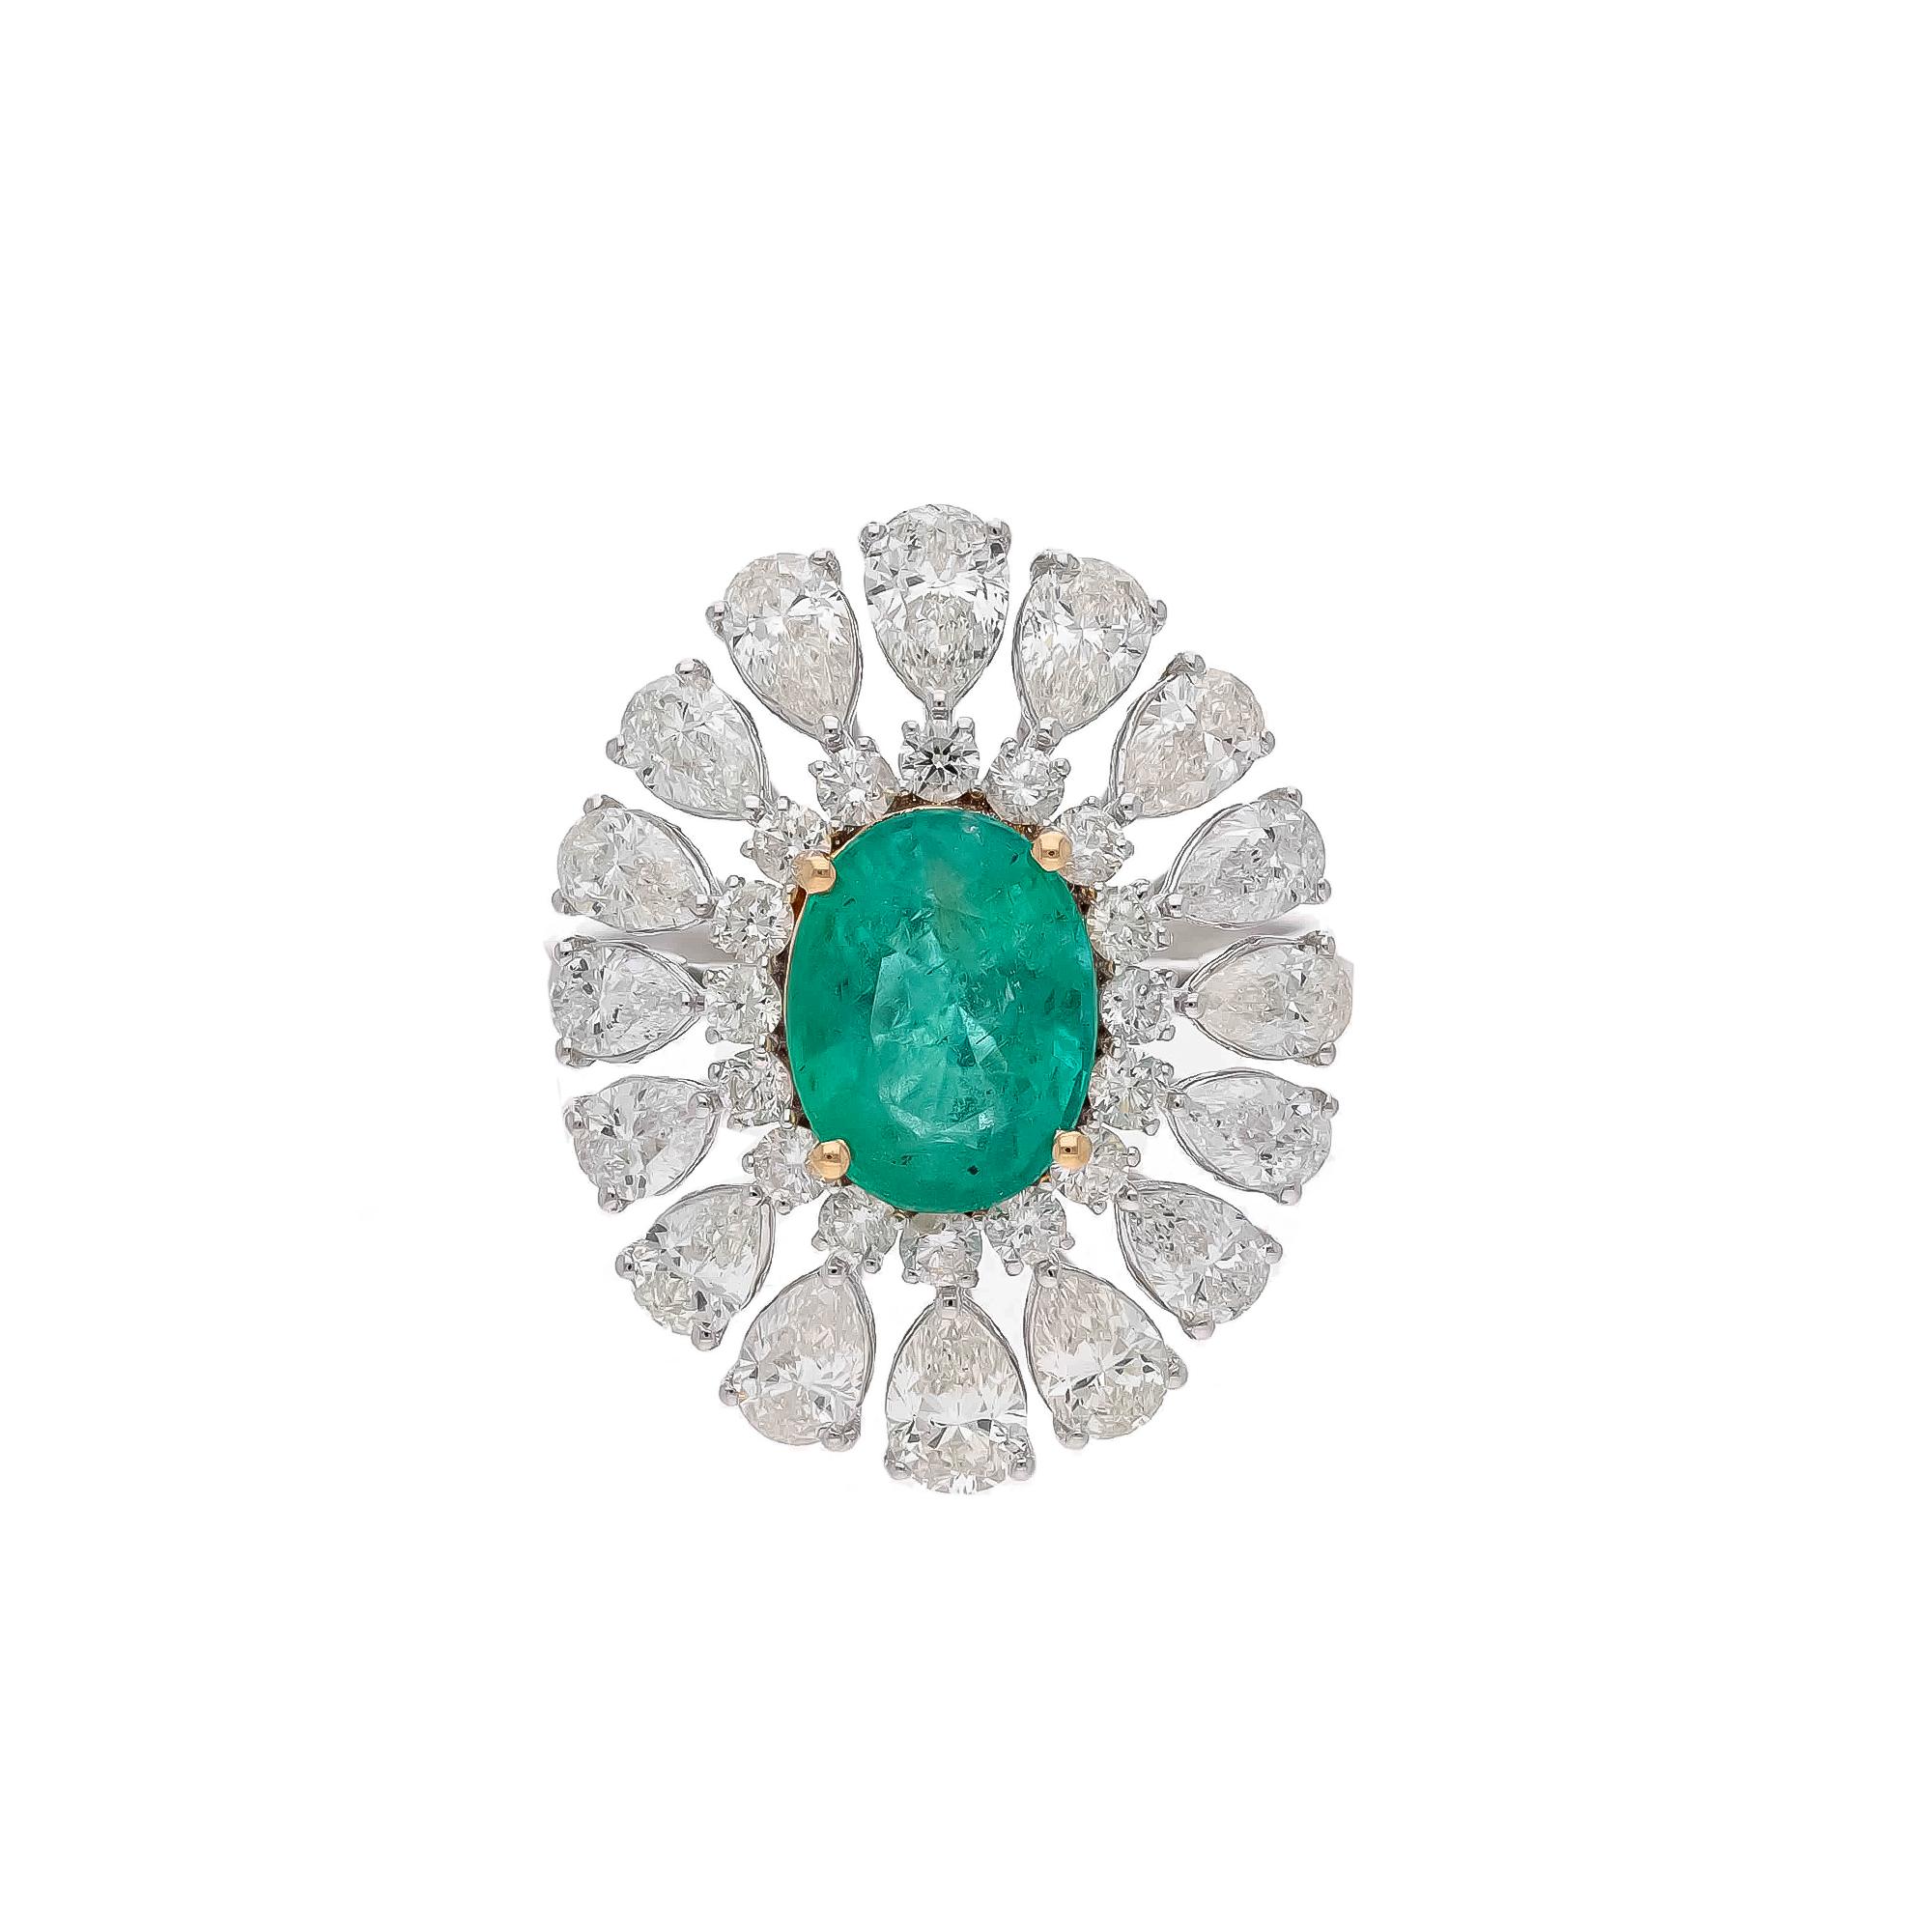 Diamonds : 2.48 carats

Emerald : 1.84carats ( columbian)

Gold : 4.64 gm( 18k)

This is a beautiful natural Columbian ring  with very high quality emeralds and diamonds ( vsi and G colour

Its very hard to capture the true color and luster of the